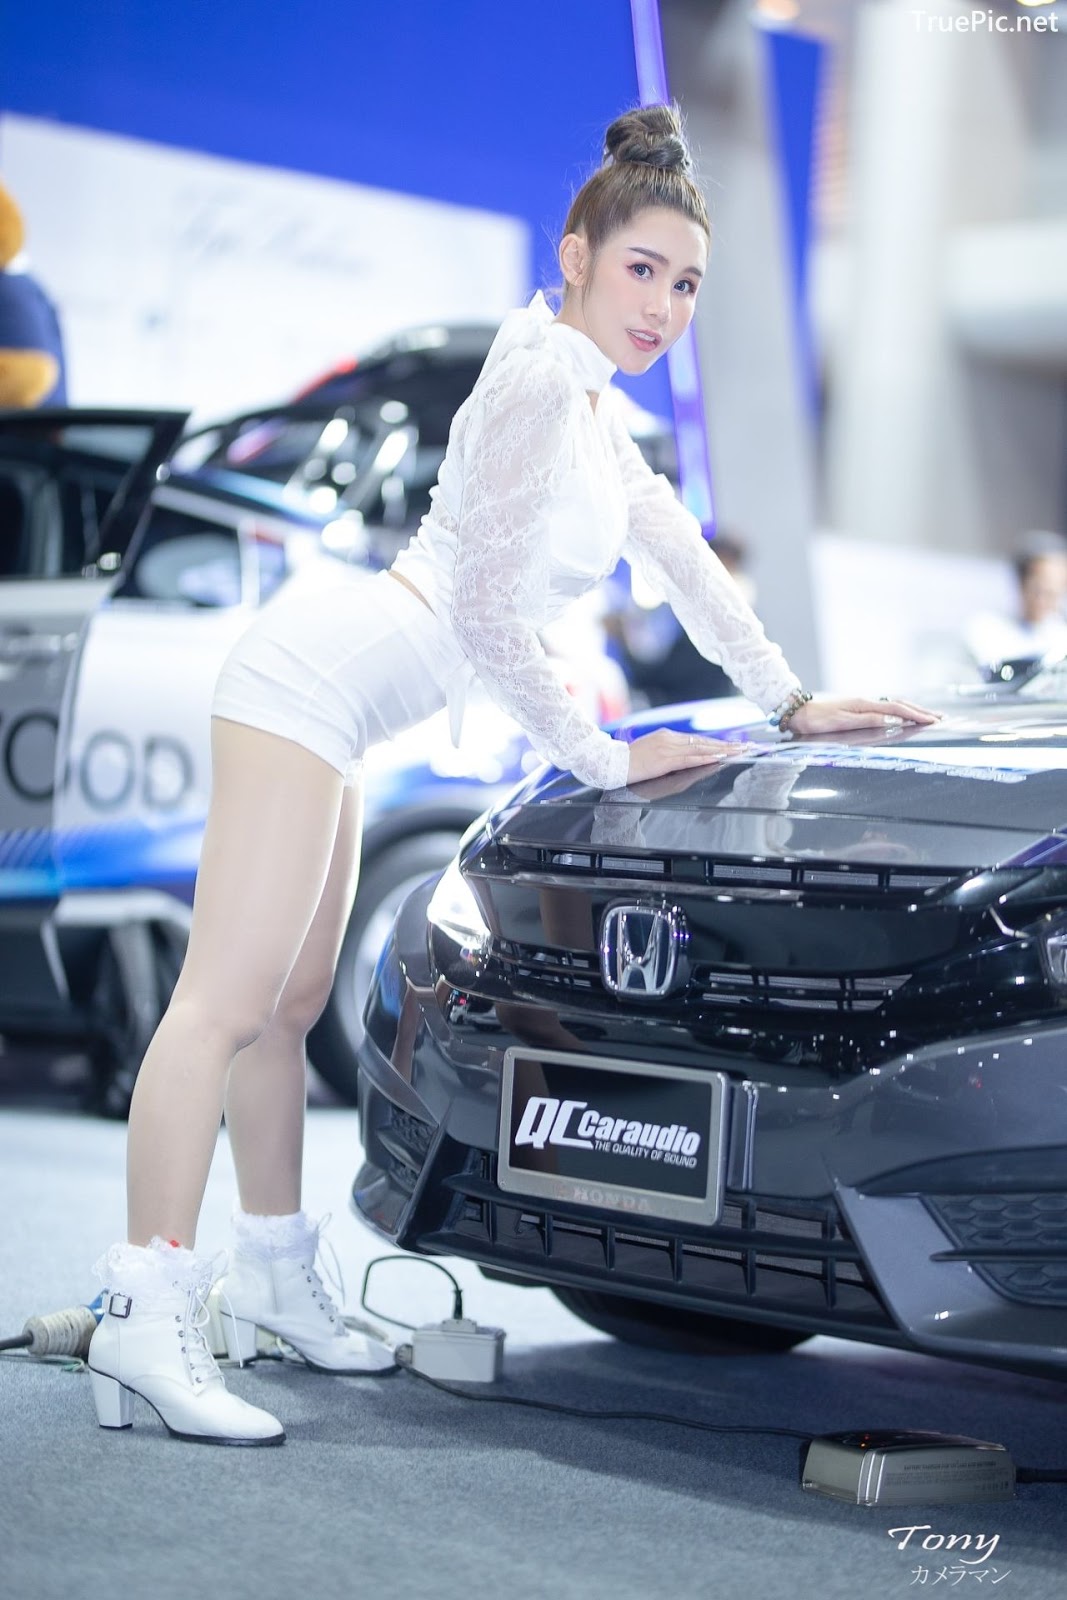 Image-Thailand-Hot-Model-Thai-Racing-Girl-At-Motor-Expo-2019-TruePic.net- Picture-70